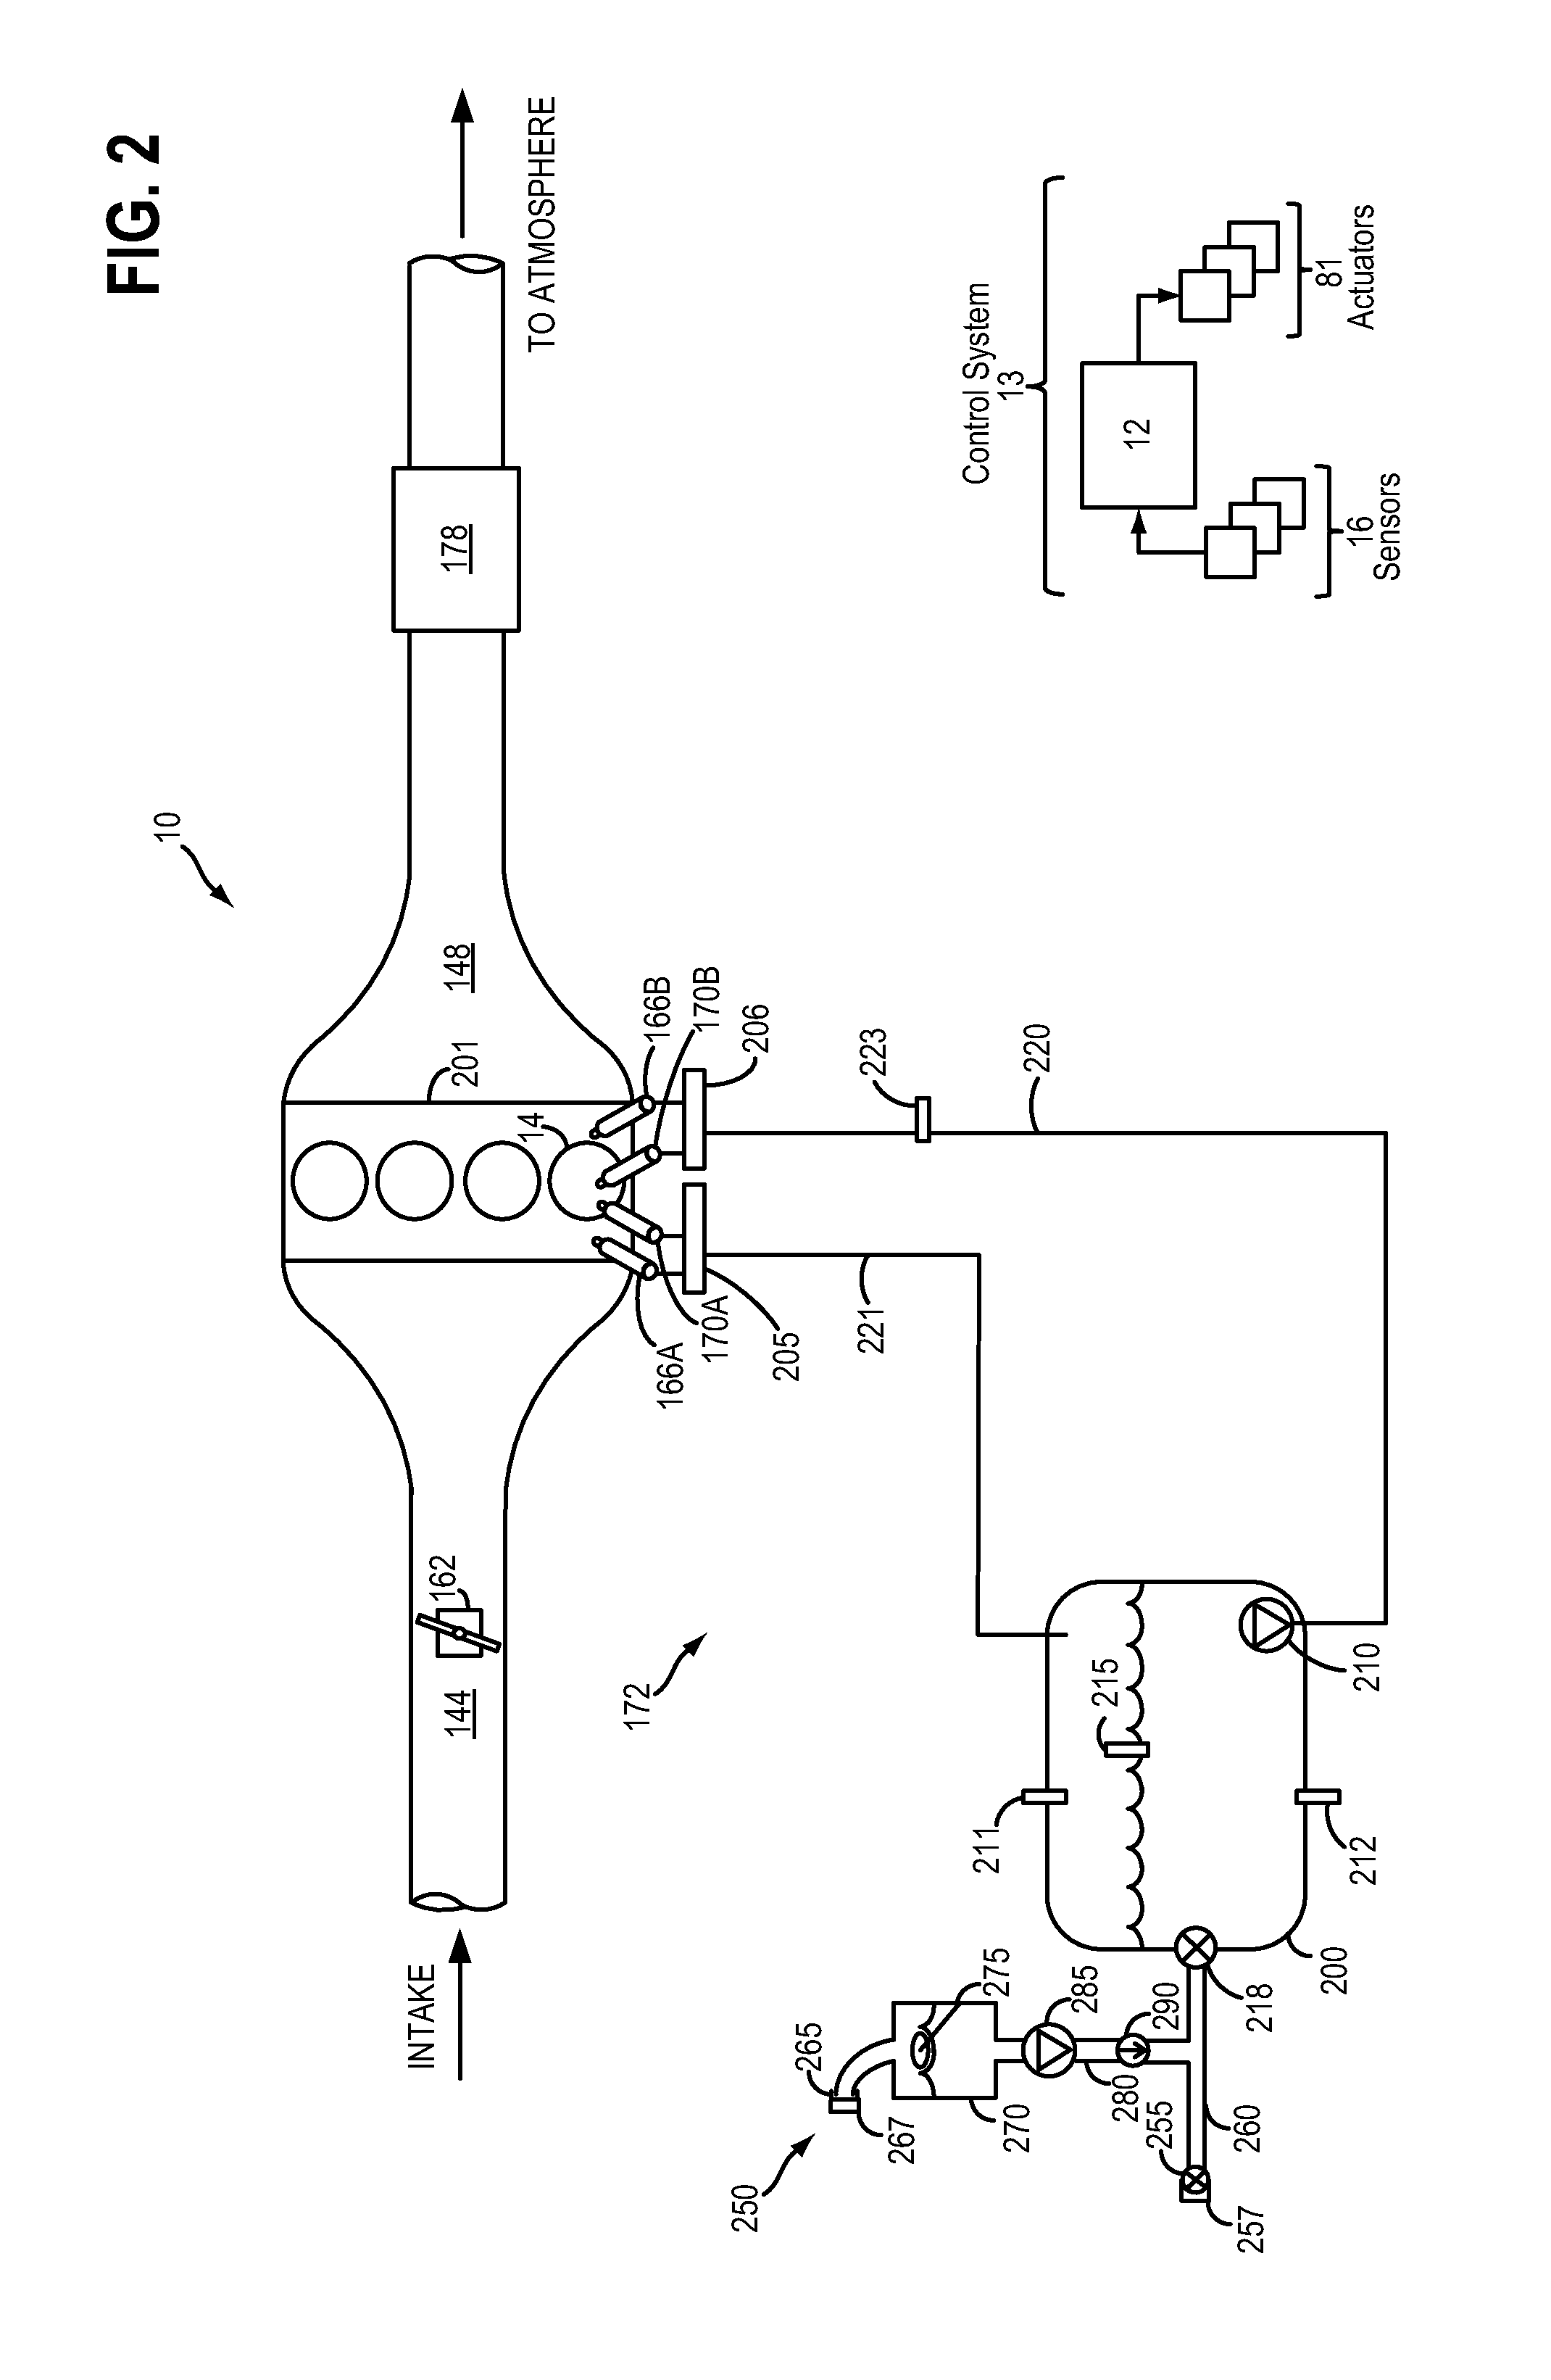 Systems and methods for determining amount of liquid and gaseous fuel